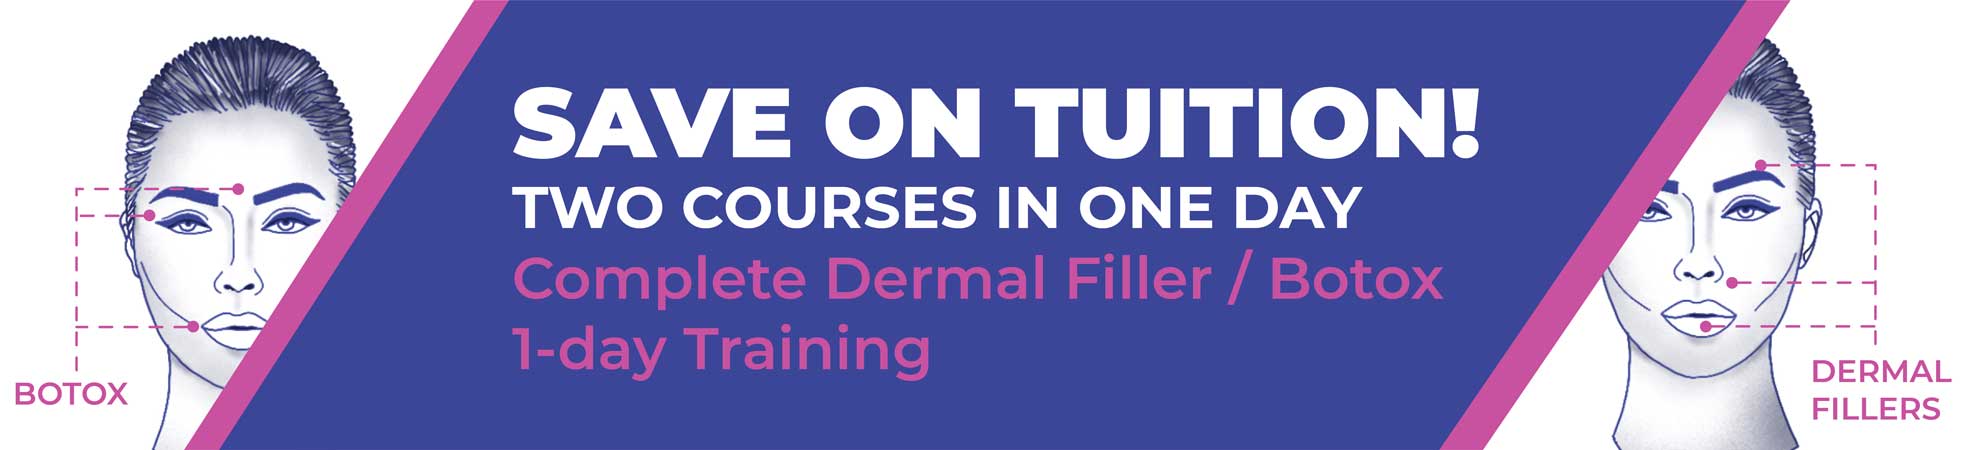 save on tuition of complete dermal filler and botox training bundle